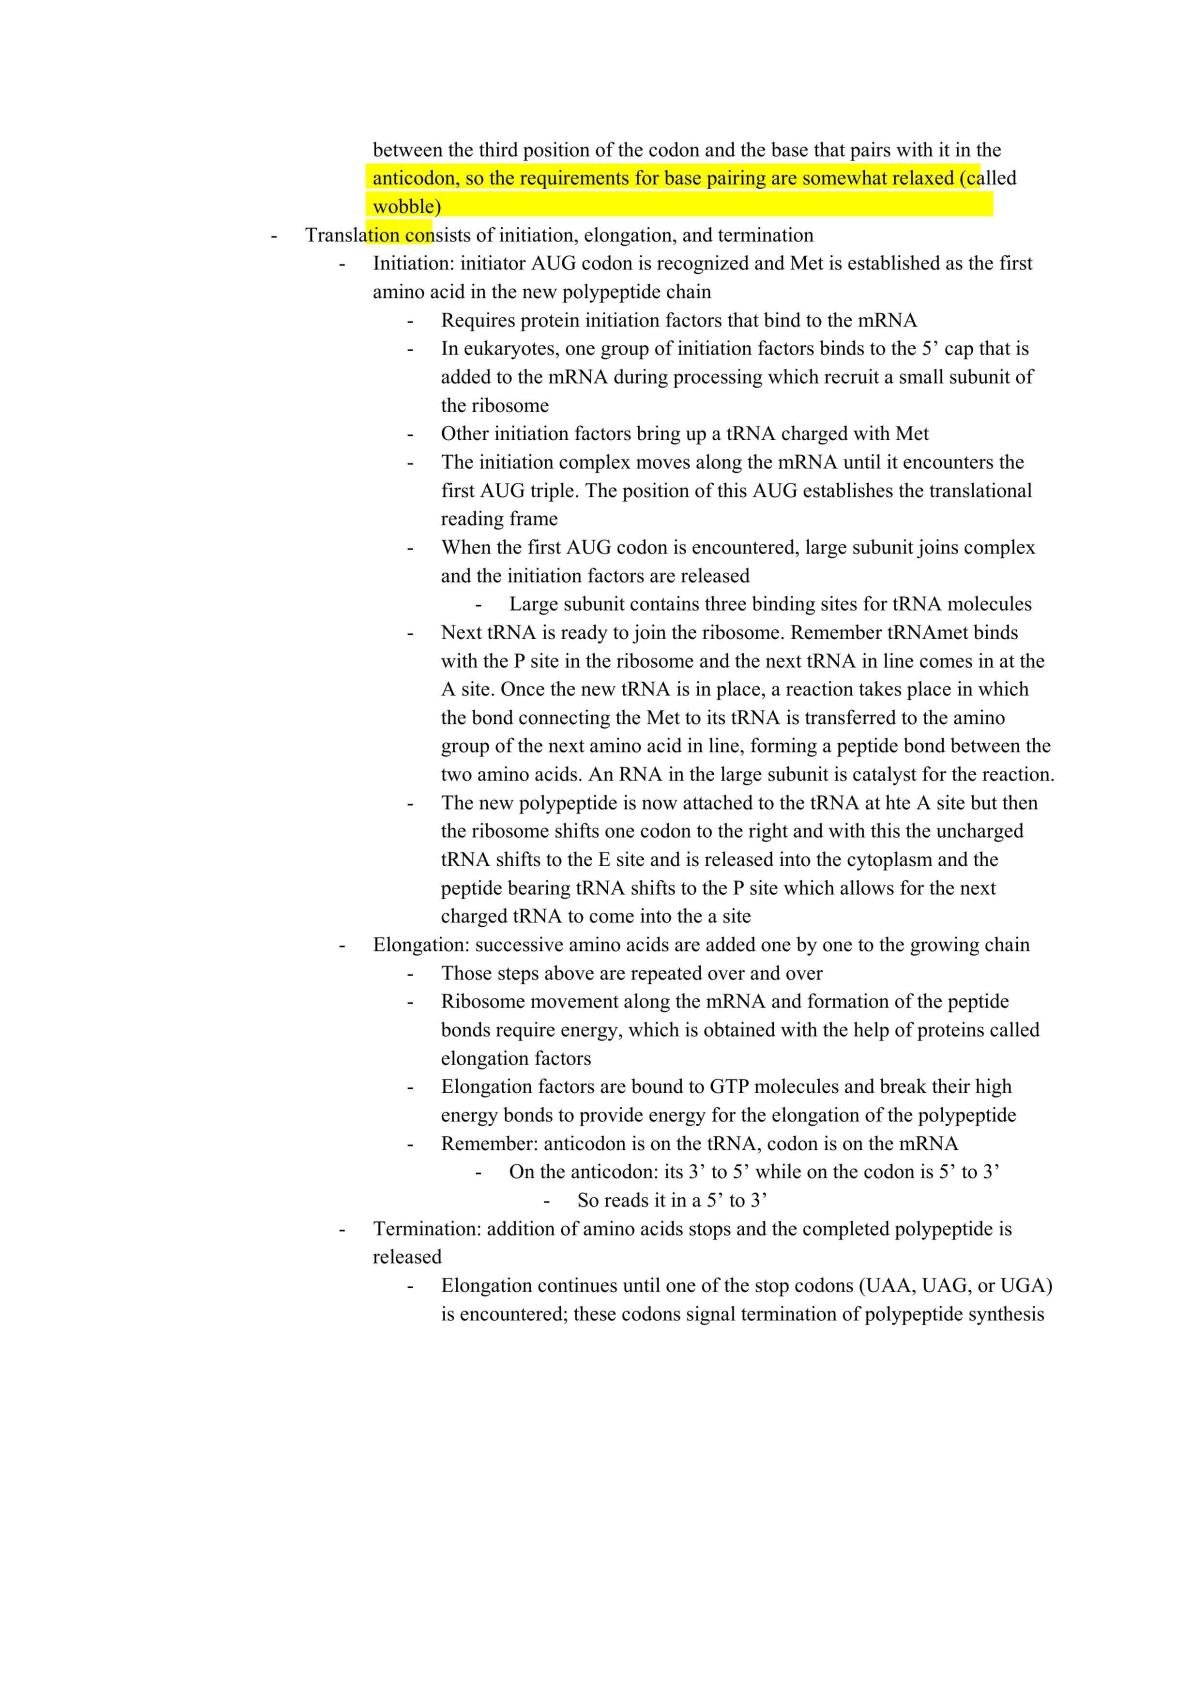 Cell & Molecular Biology Study Guide - Page 23